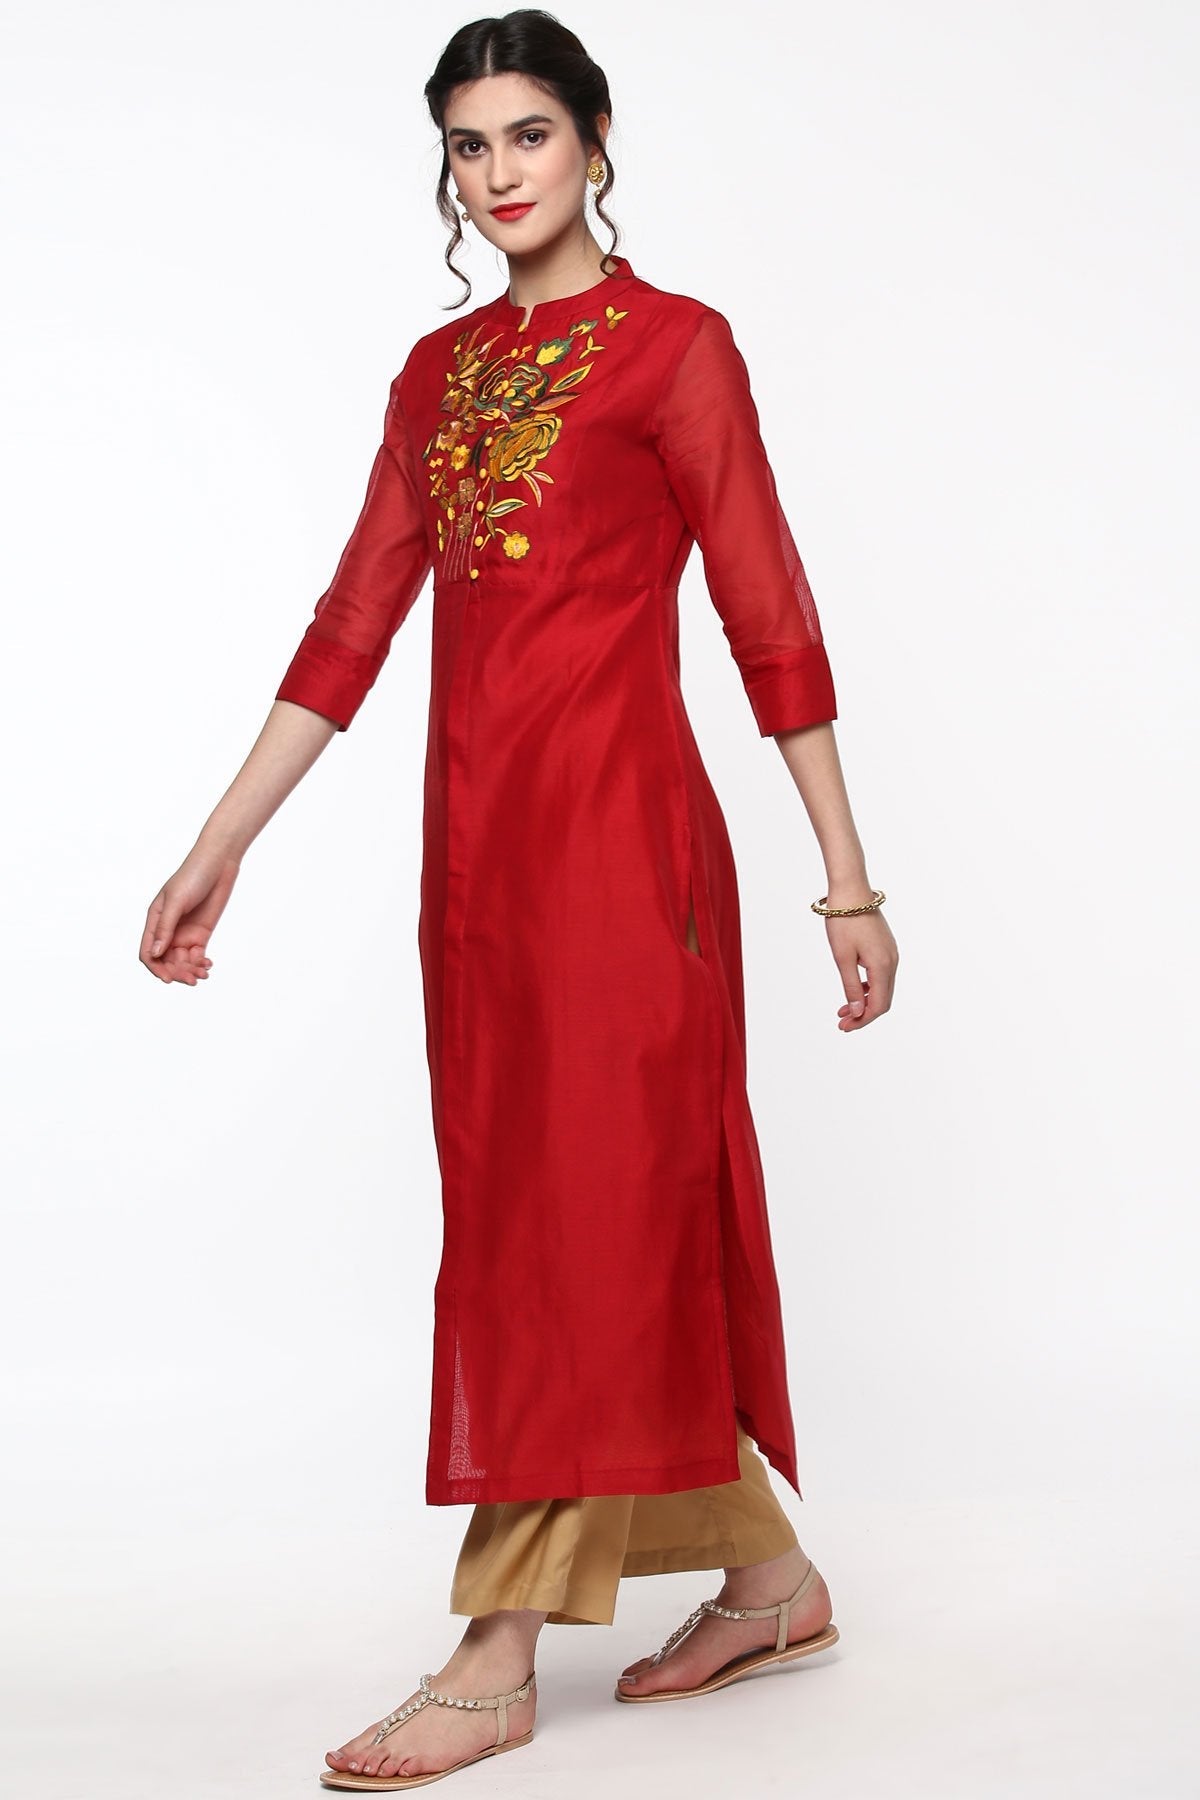 Women's Red Embroidered Front & Side Slit Kurta - SHAE